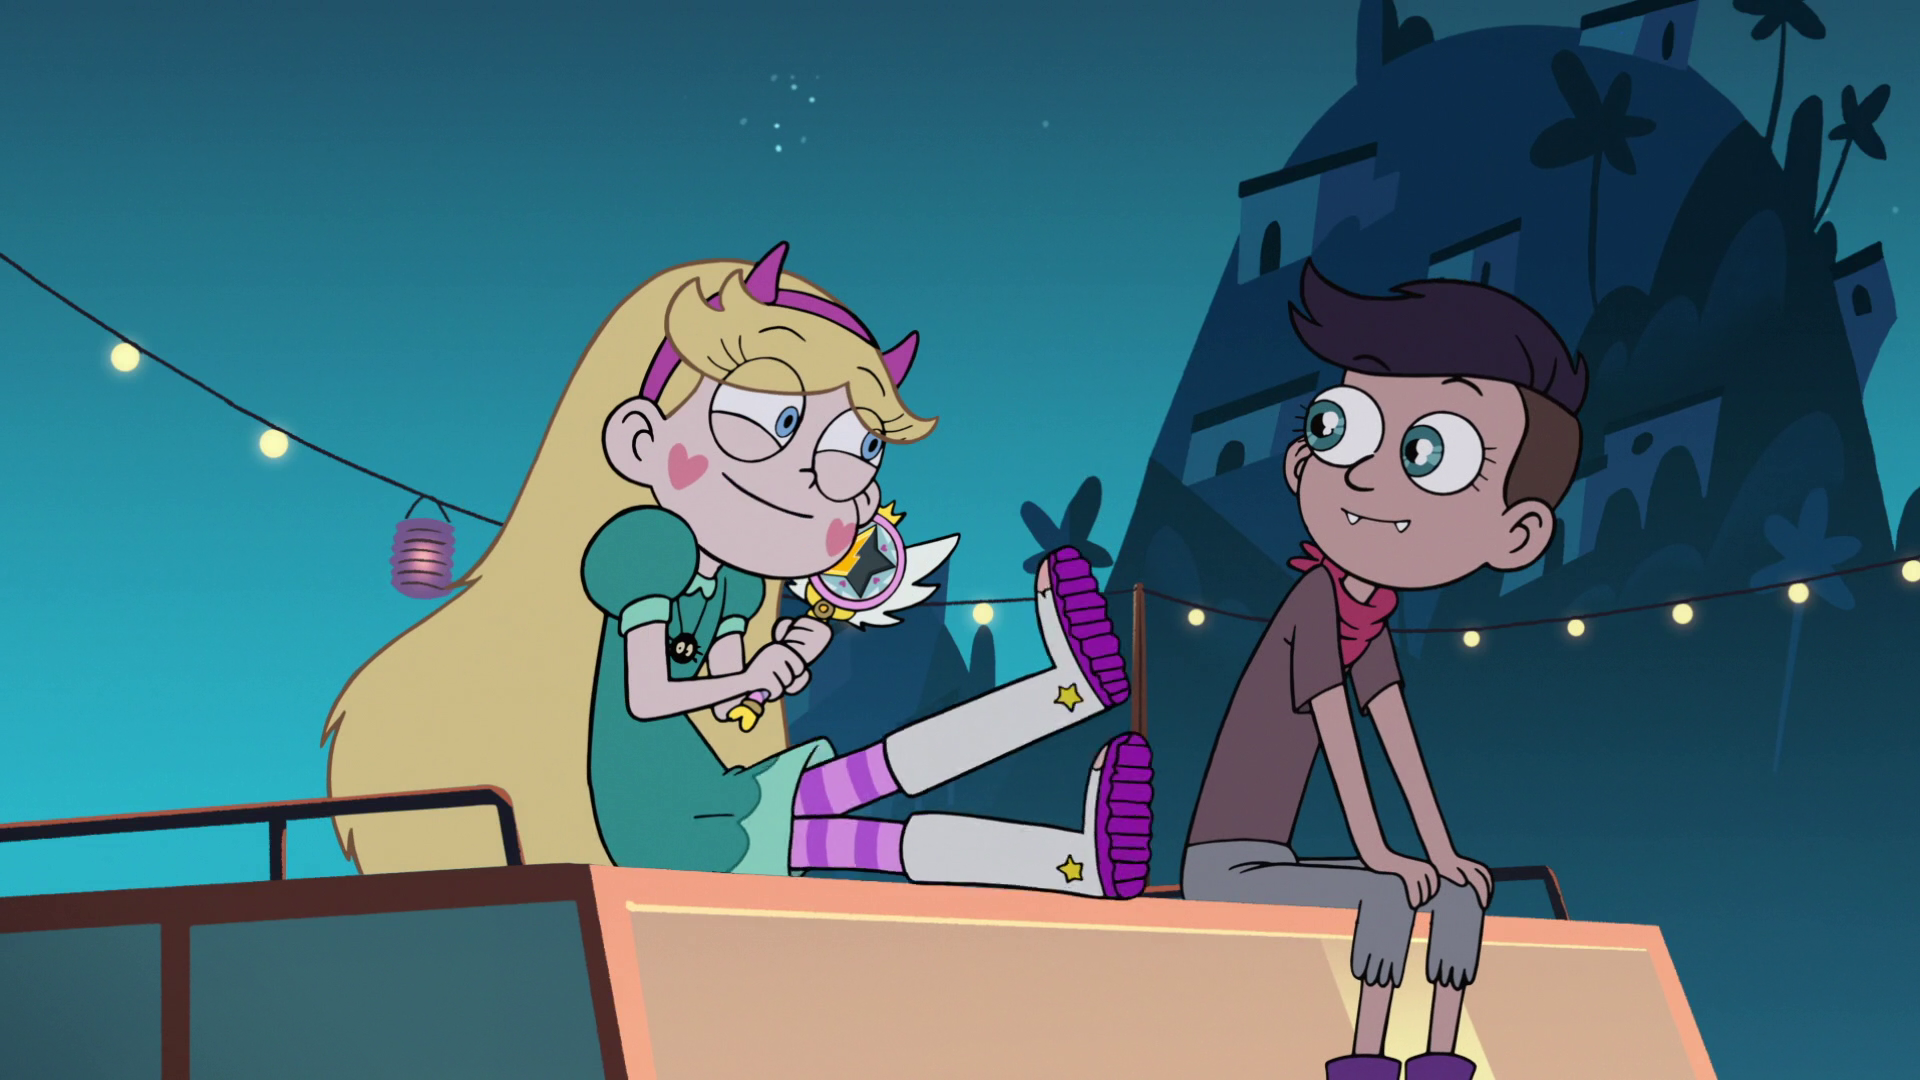 Star Vs Marco, the asshat wetback.